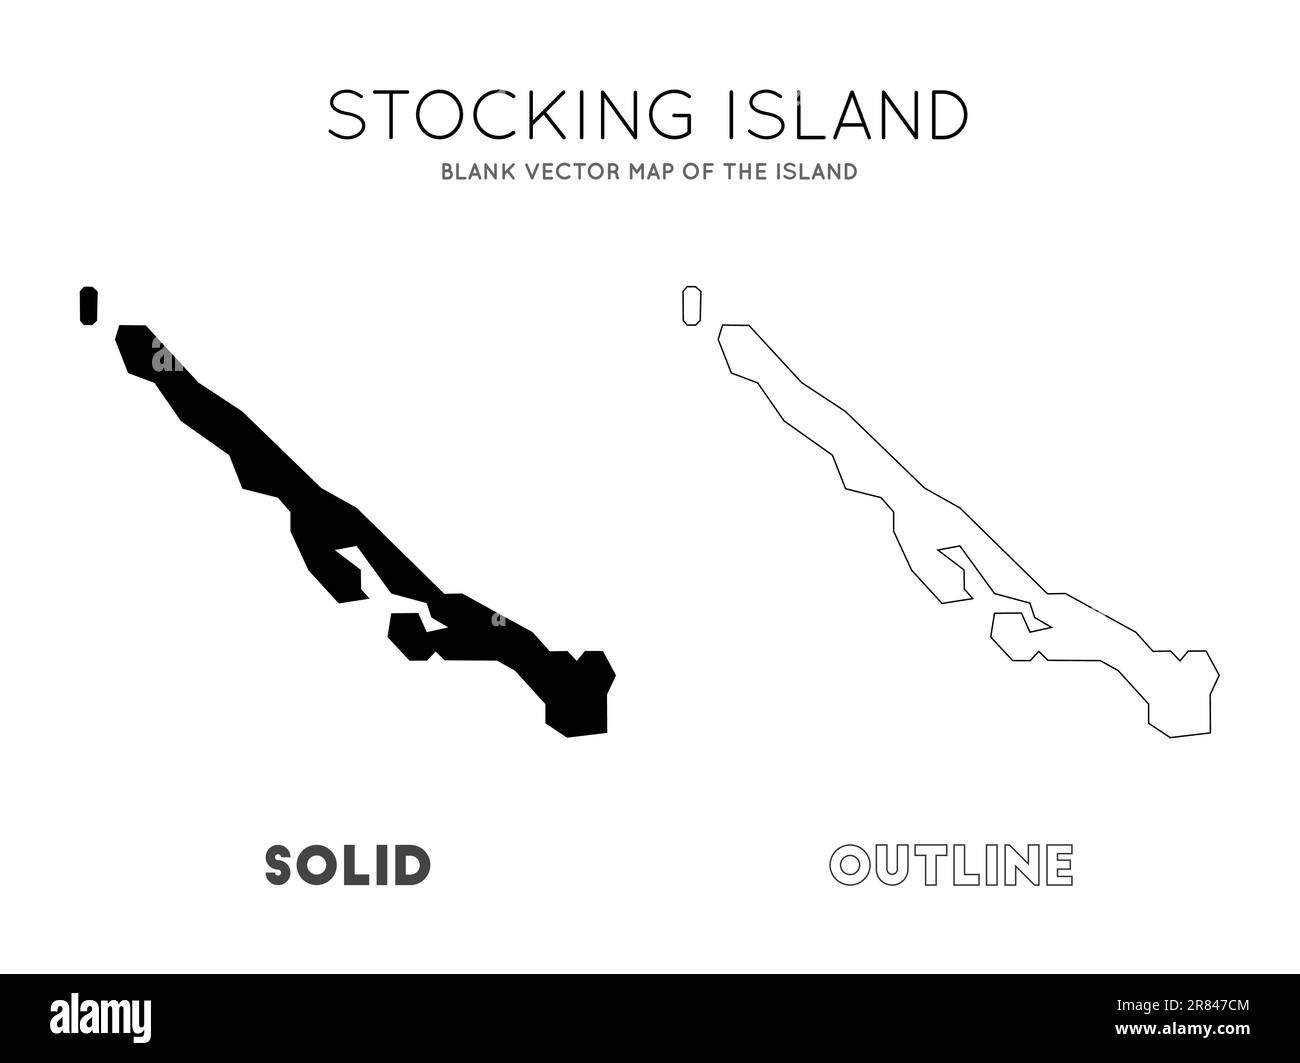 Stocking Island map. Borders of Stocking Island for your infographic. Vector illustration. Stock Vector